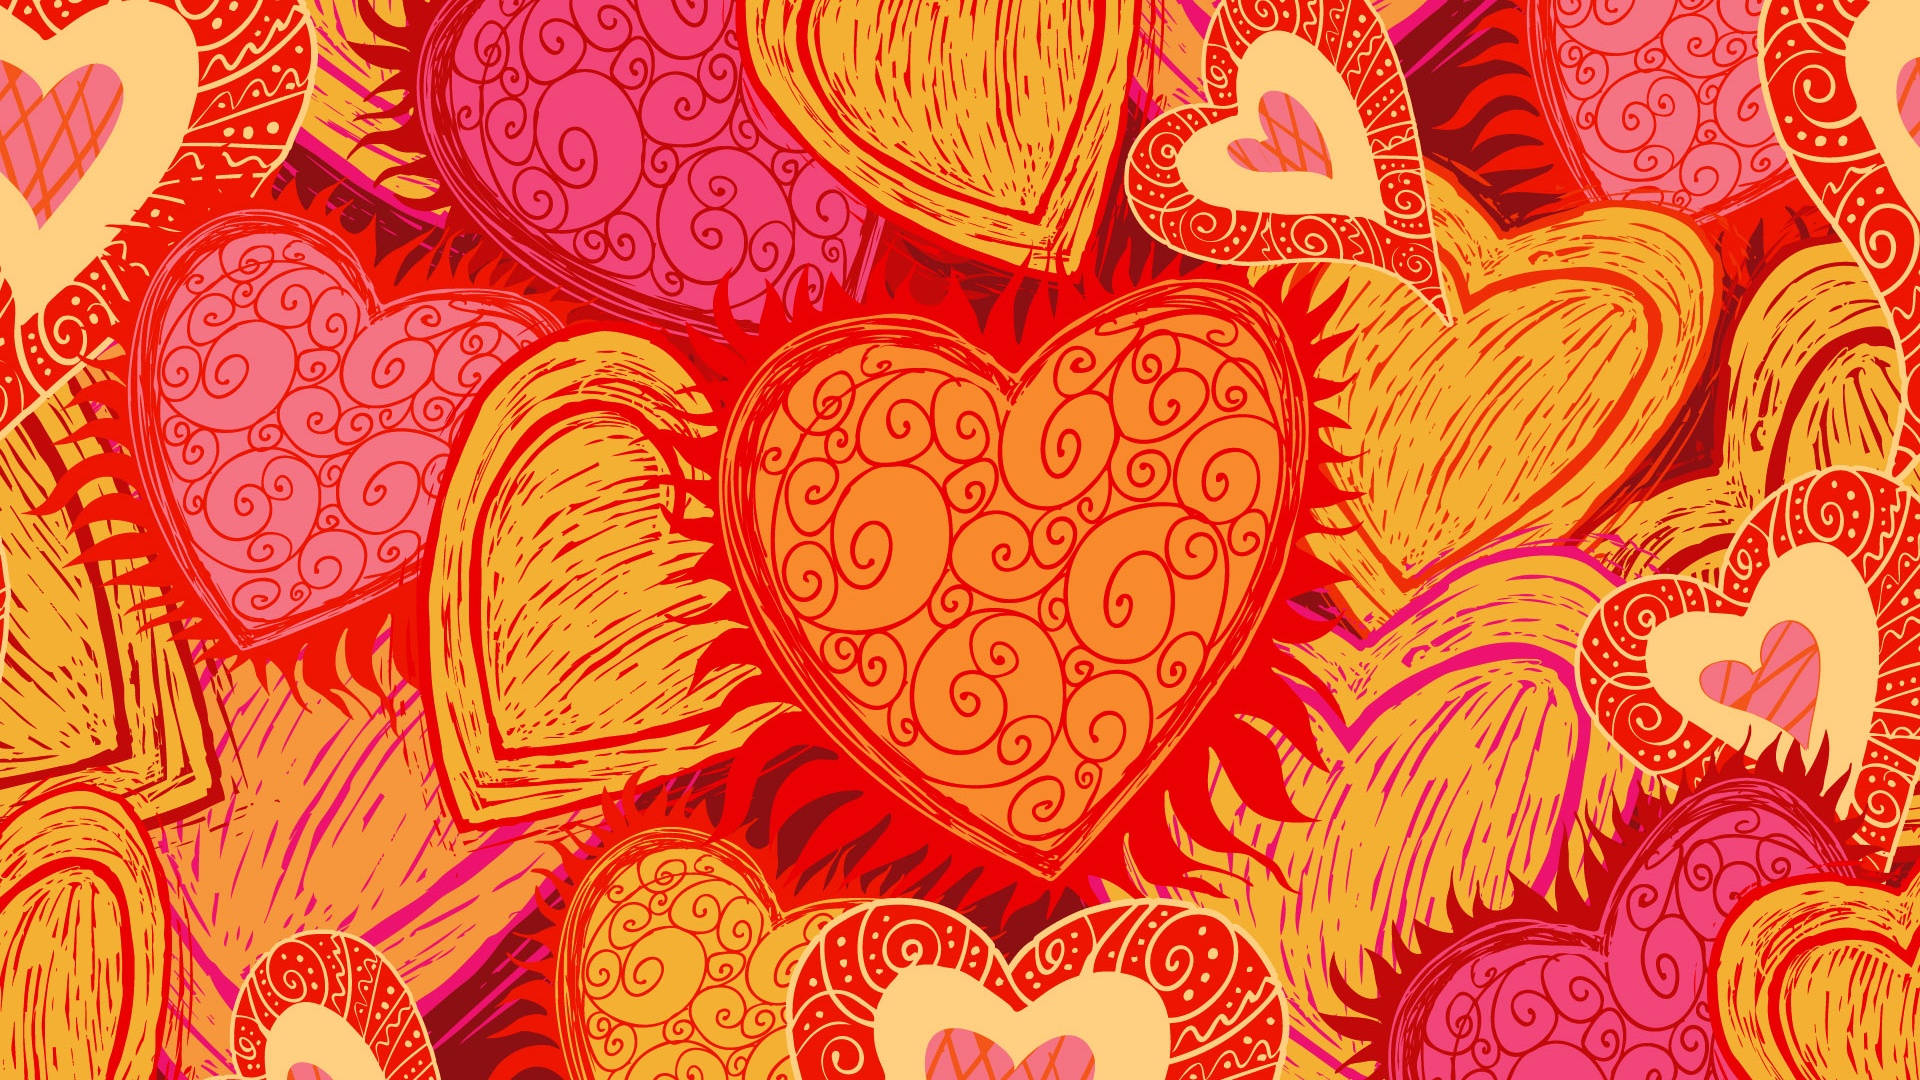 hearts tumblr background